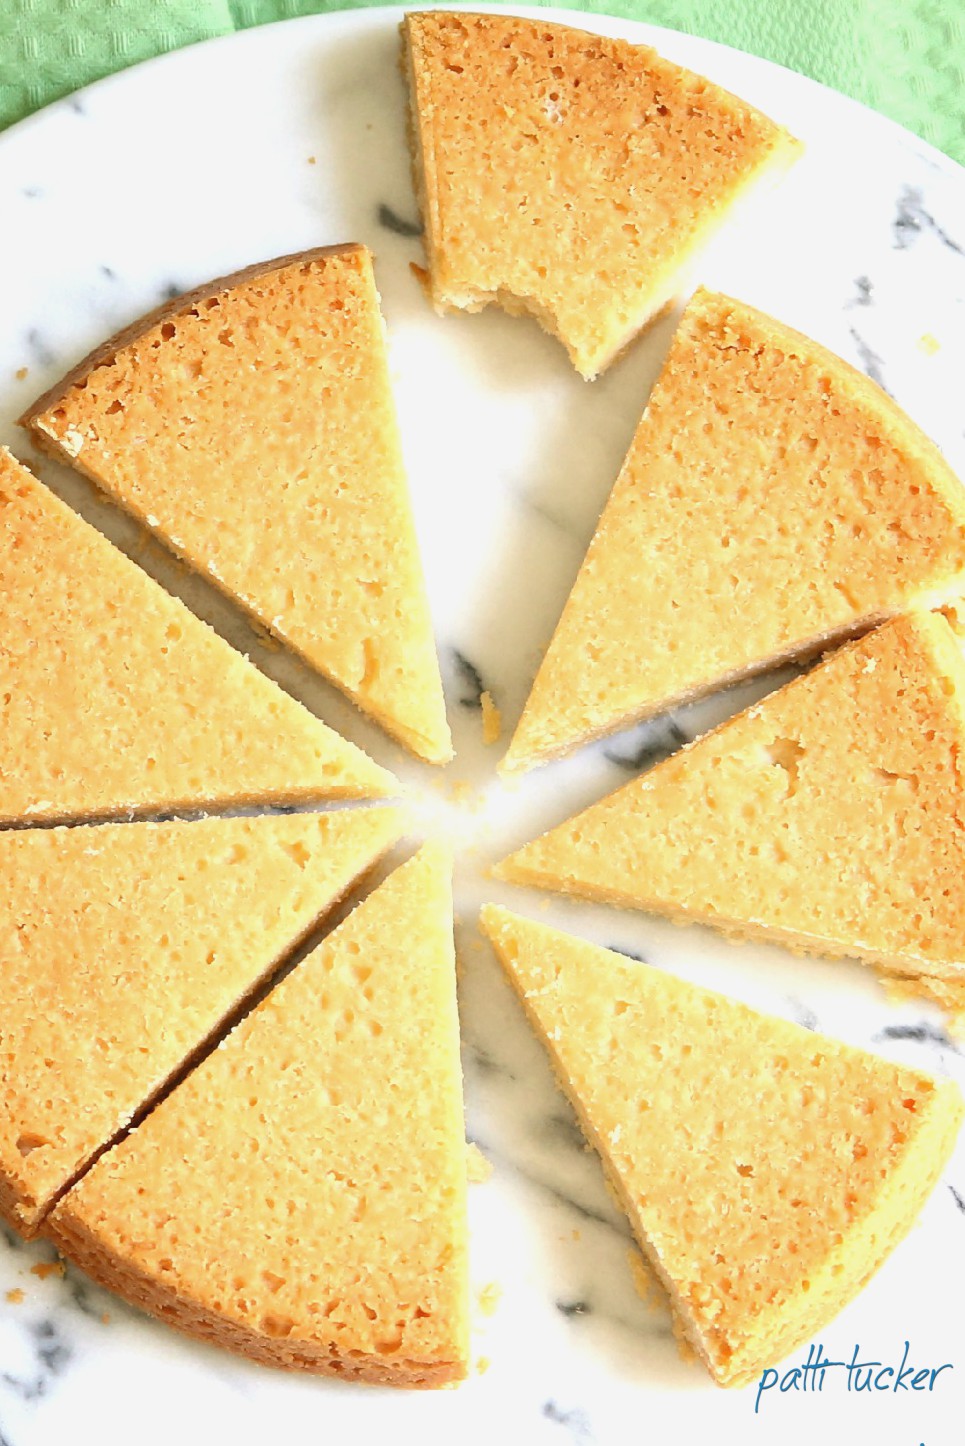 Need A Delicious Gift? Buttery Shortbread Never Disappoints